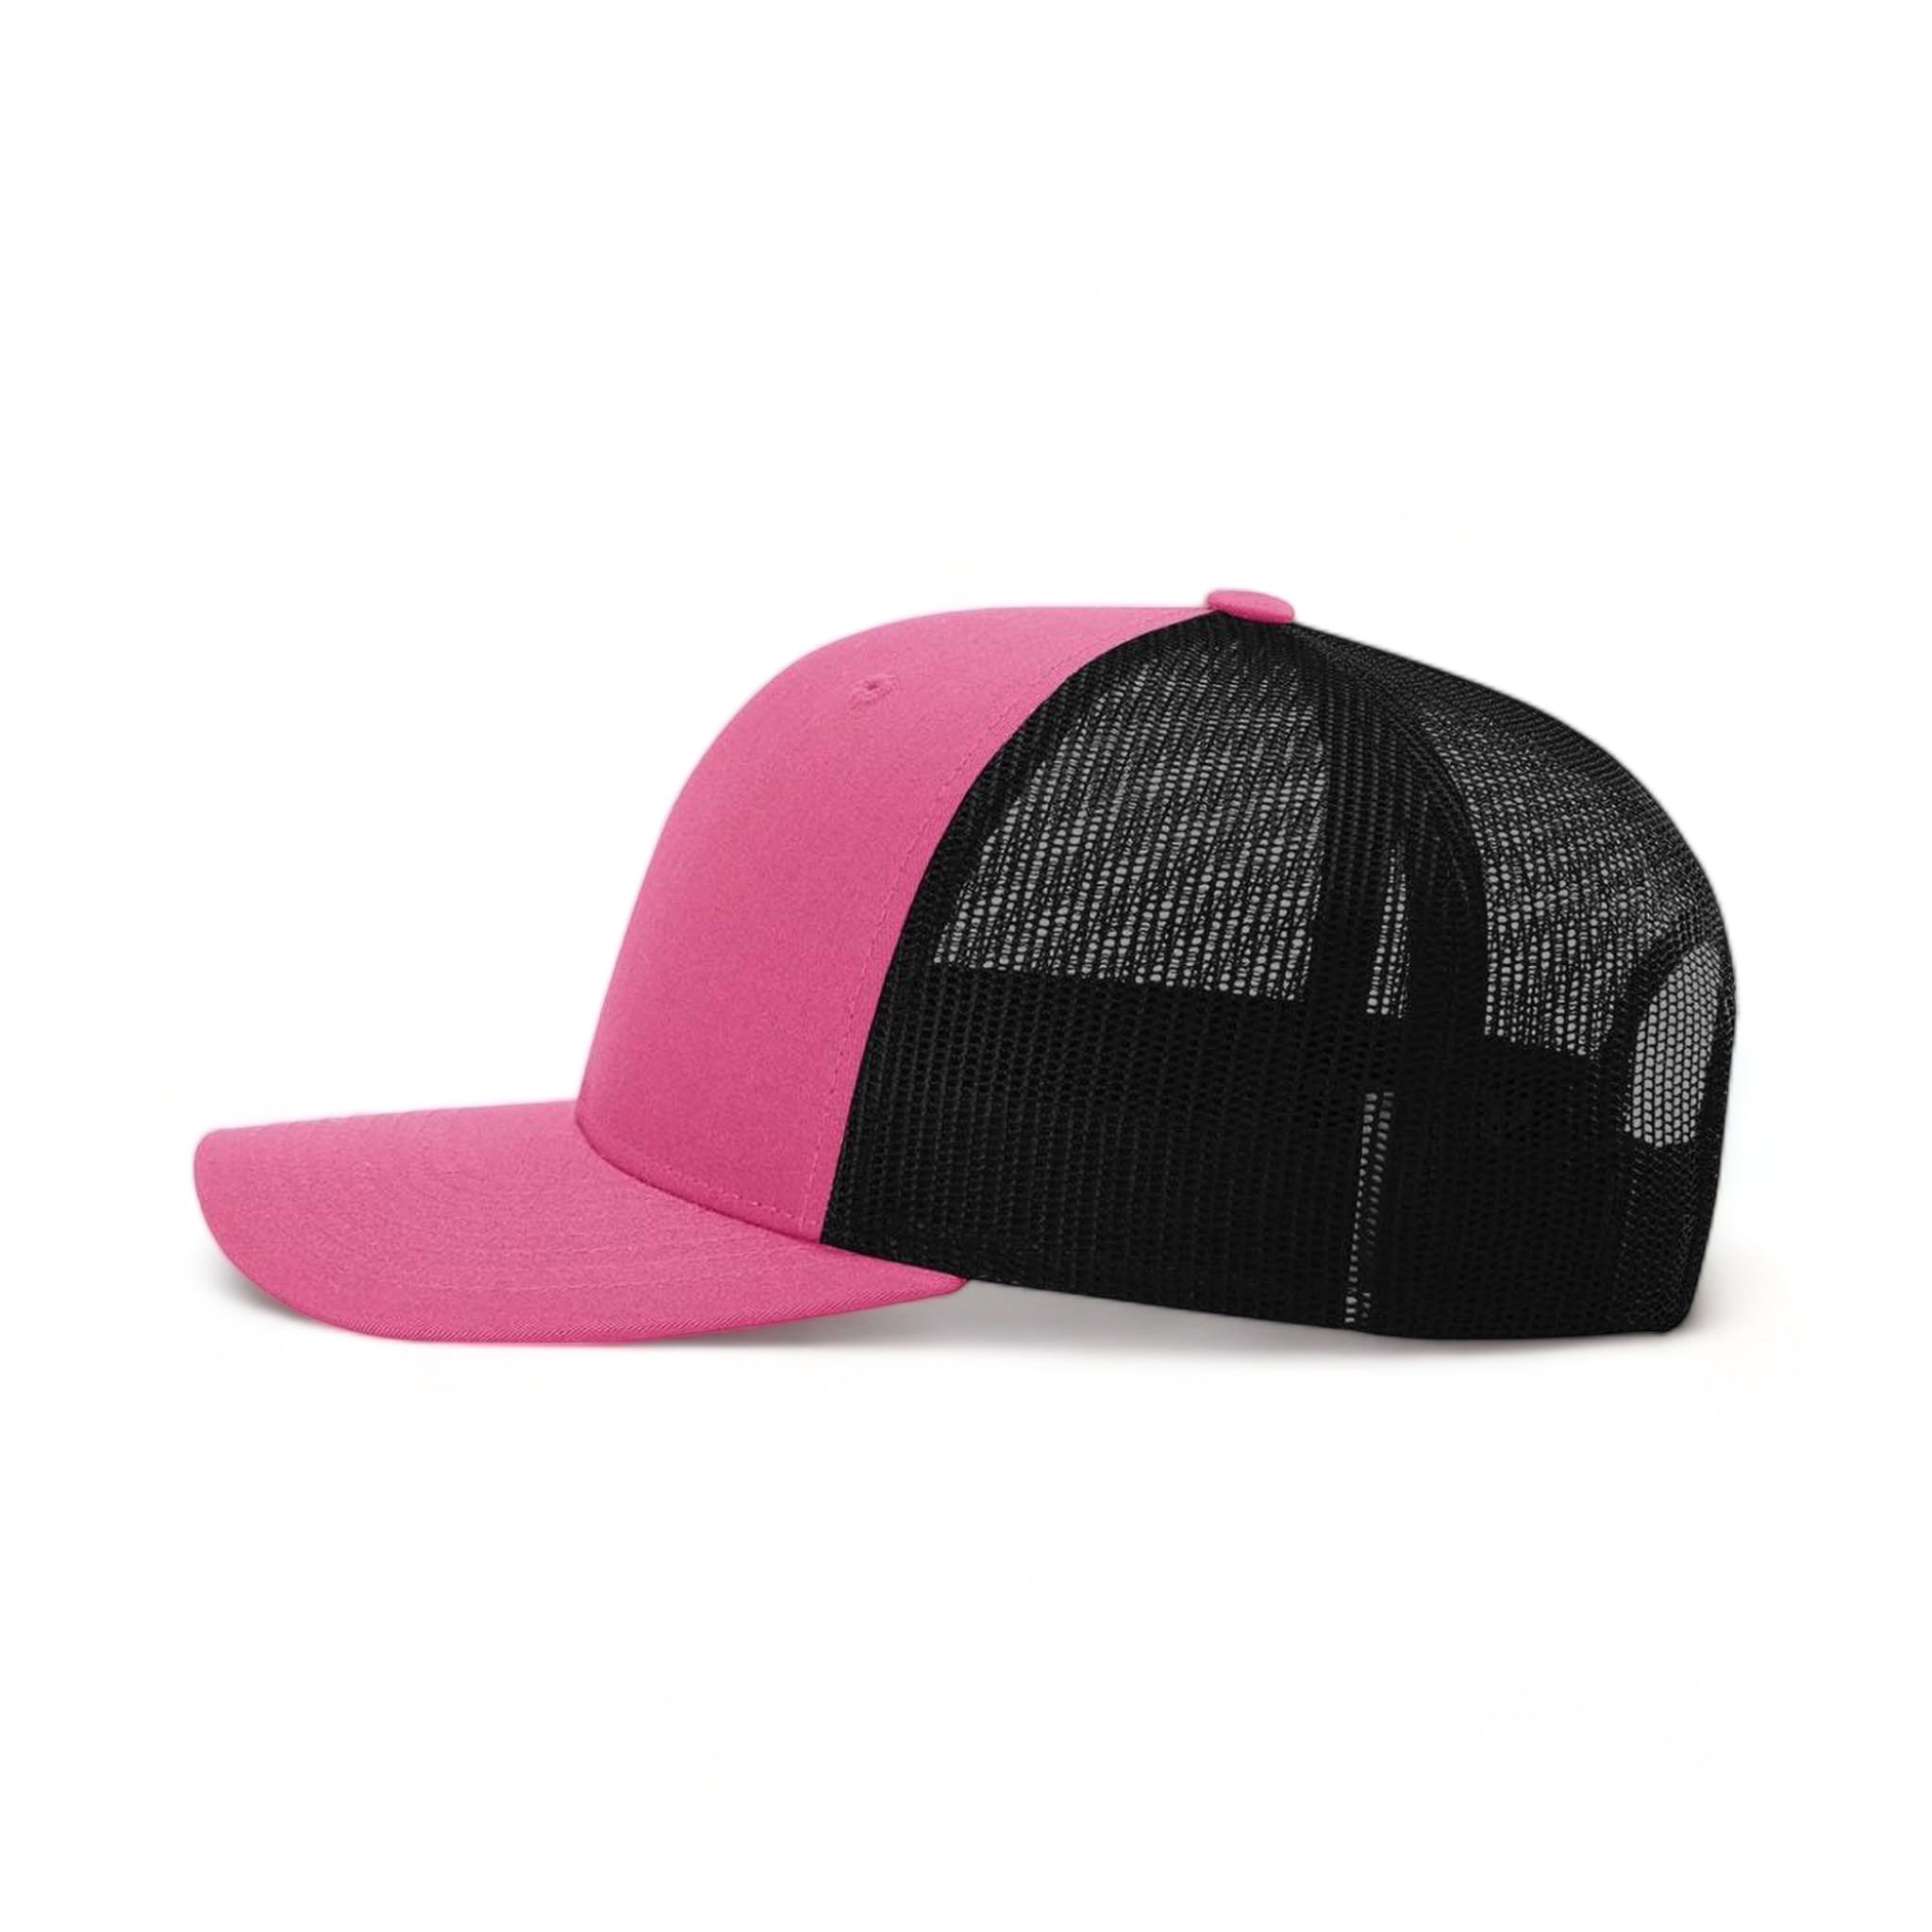 Side view of Richardson 115 custom hat in hot pink and black